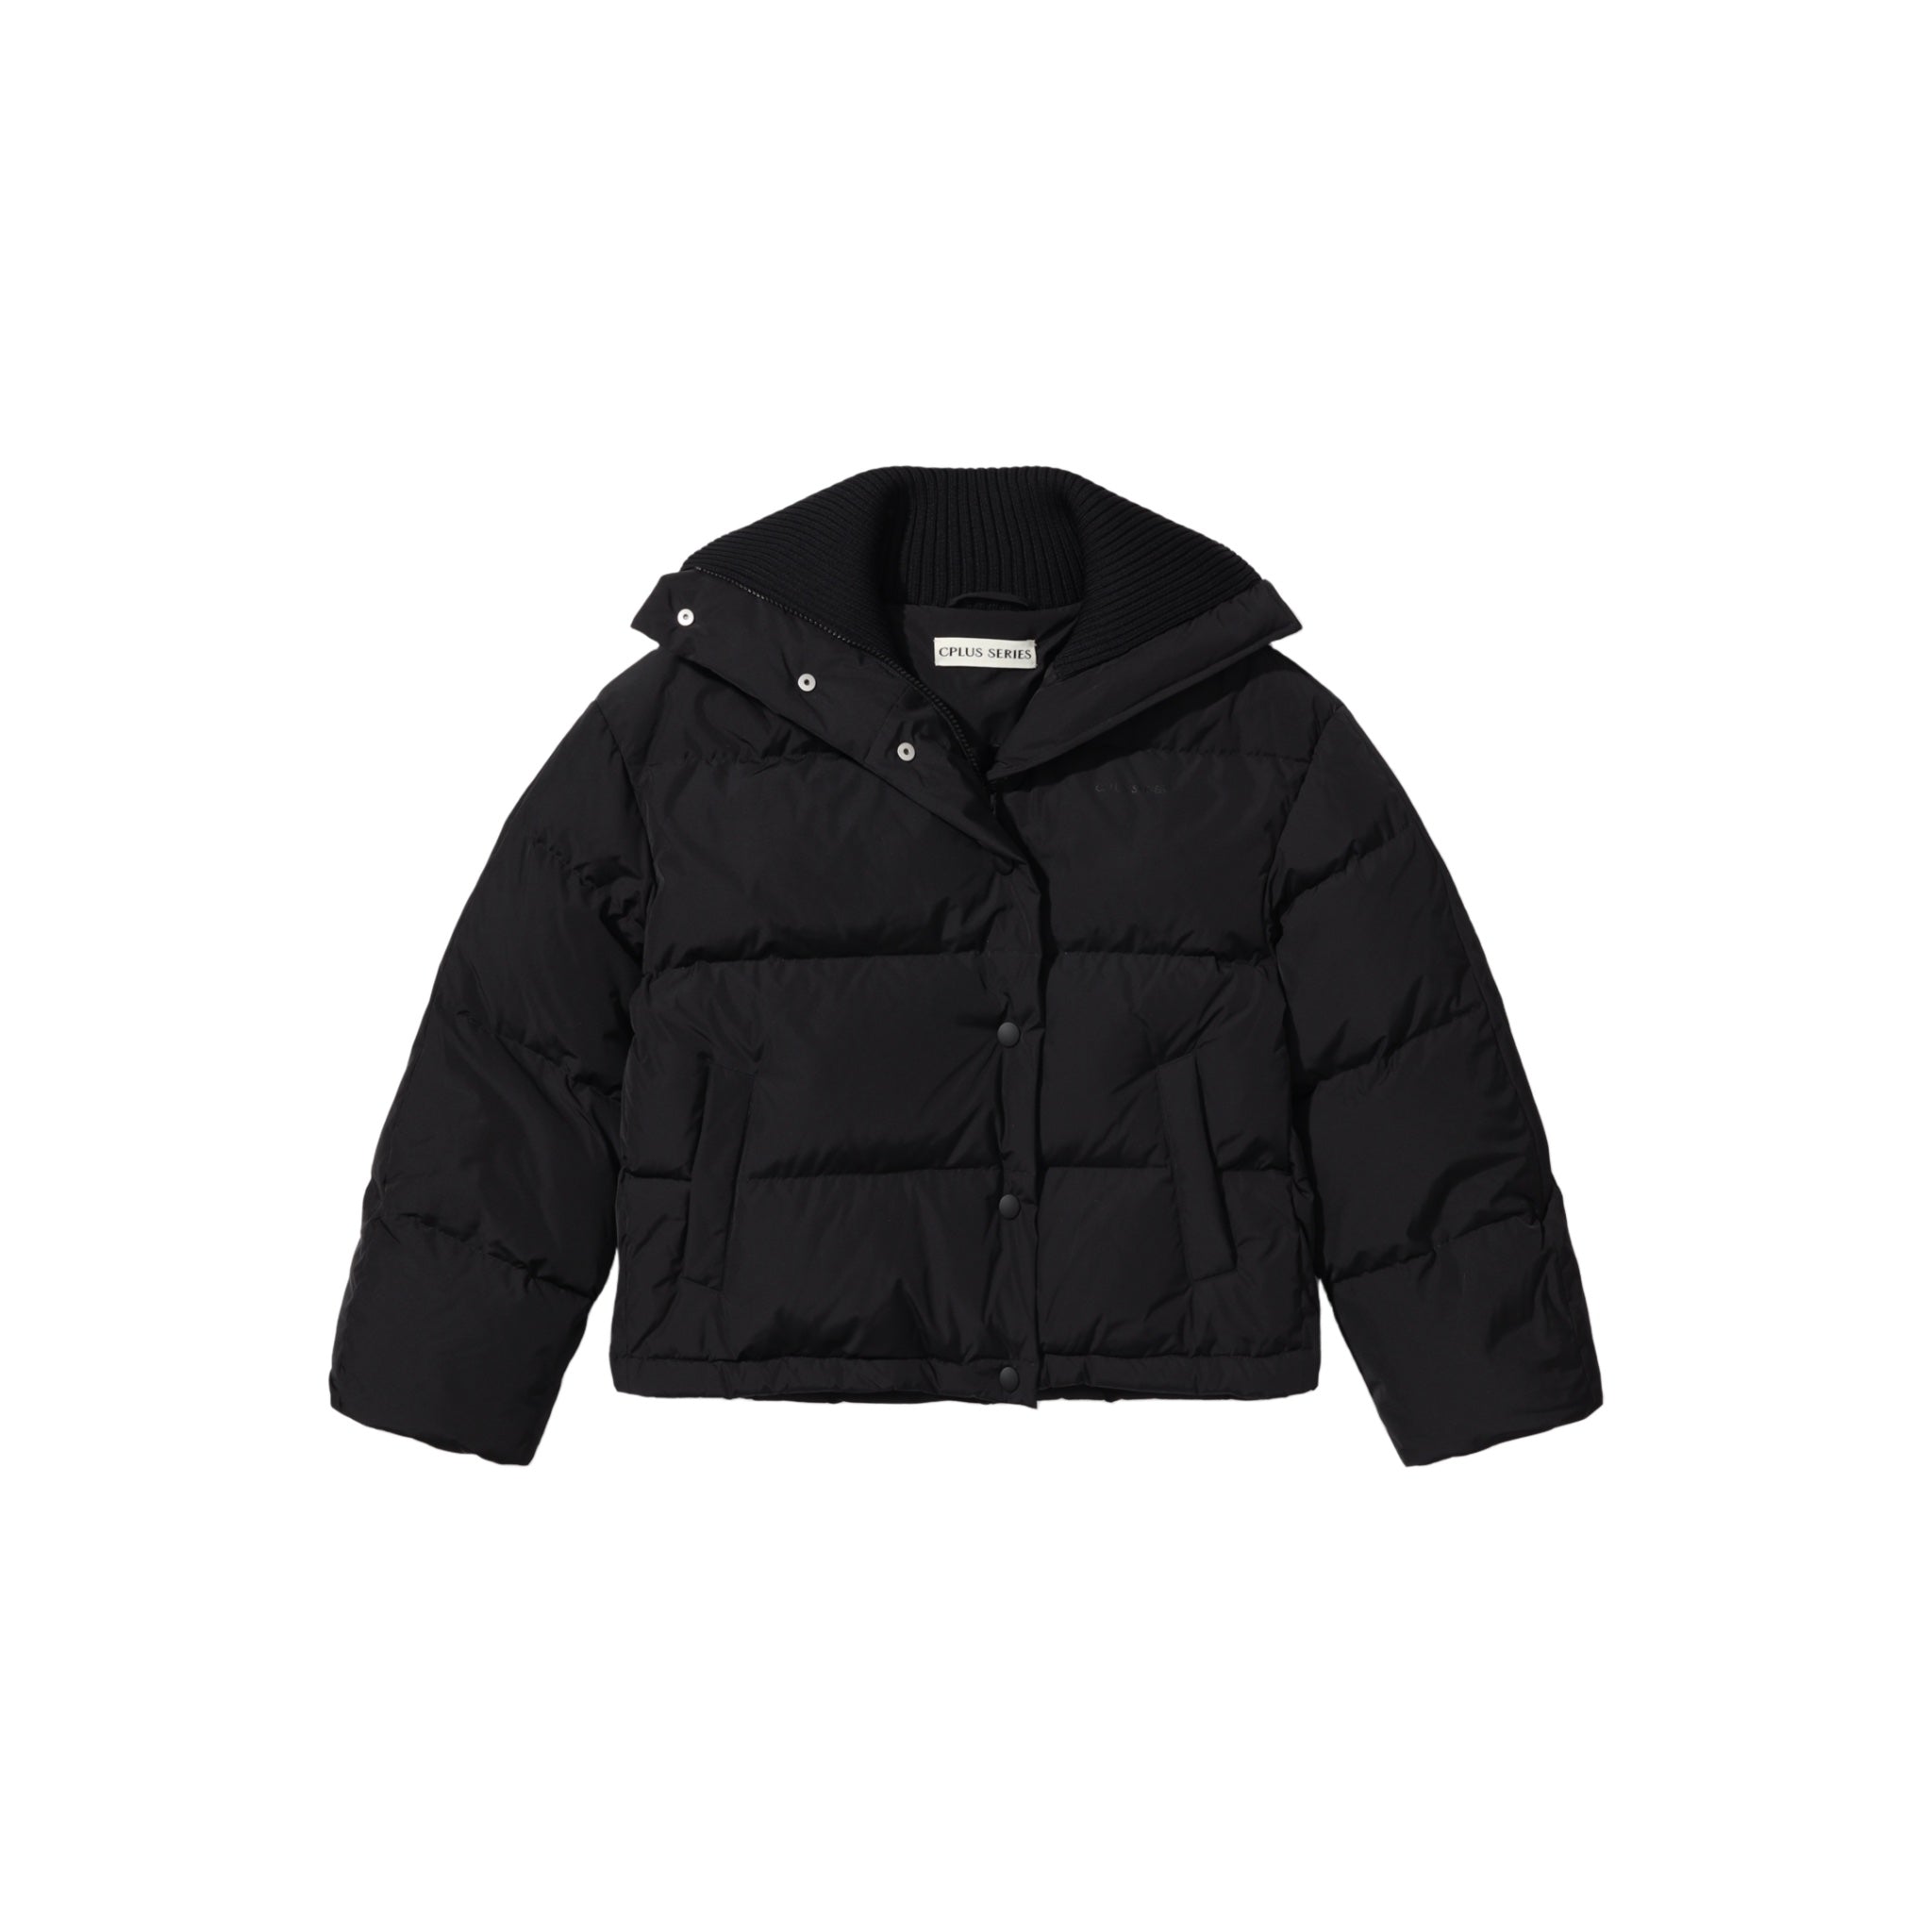 CPLUS SERIES Black Down Jacket with Logo Prints and Rib Details | MADA IN CHINA